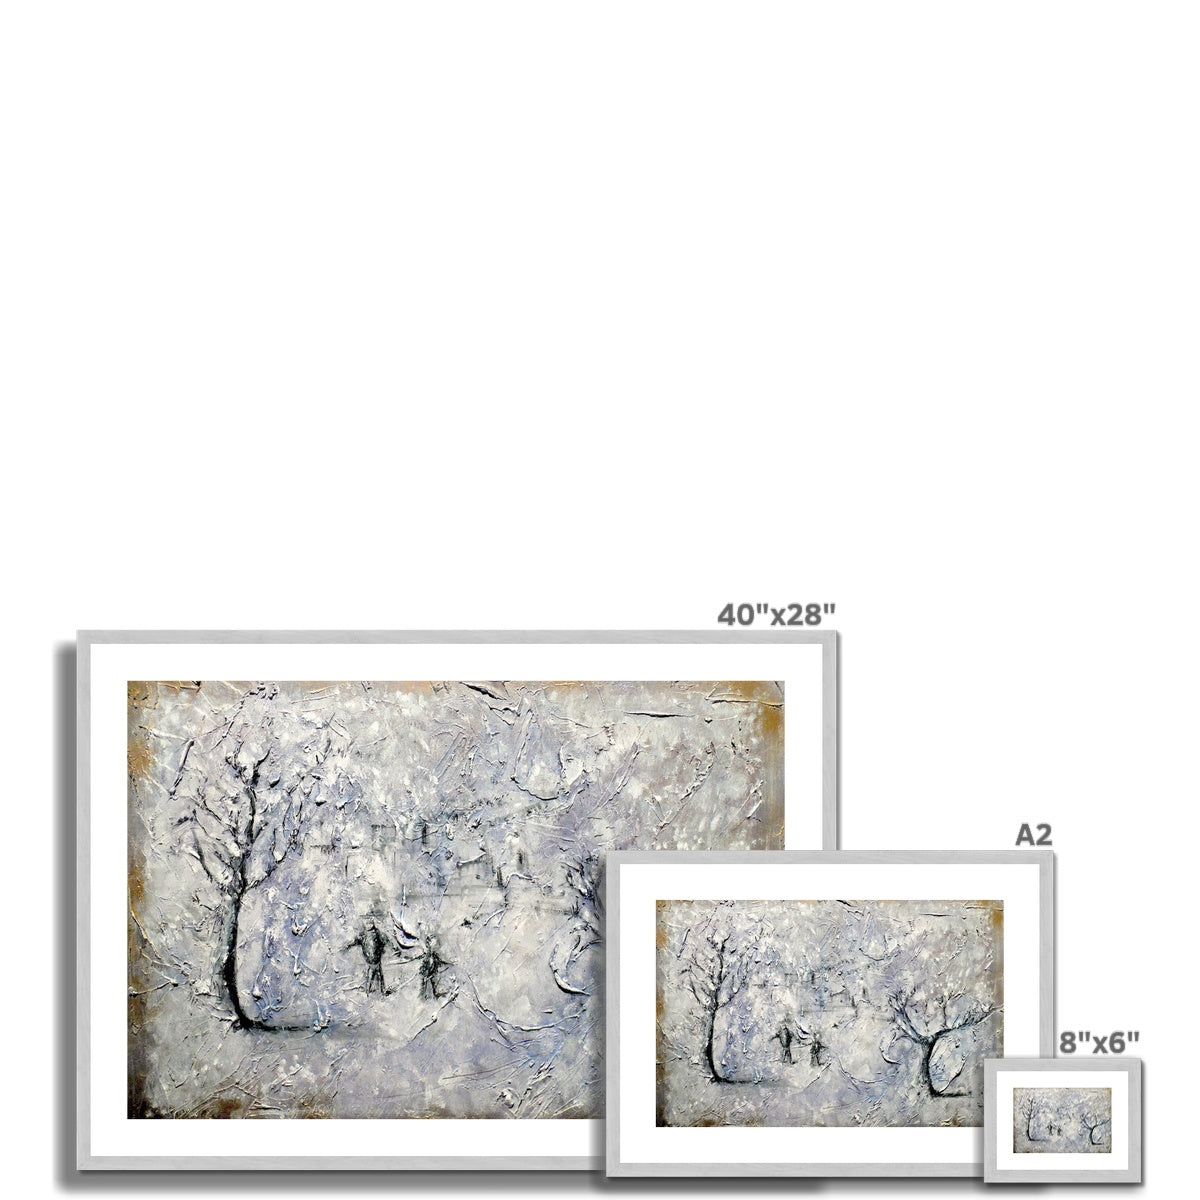 Father Daughter Snow Painting | Antique Framed & Mounted Prints From Scotland-Antique Framed & Mounted Prints-Abstract & Impressionistic Art Gallery-Paintings, Prints, Homeware, Art Gifts From Scotland By Scottish Artist Kevin Hunter